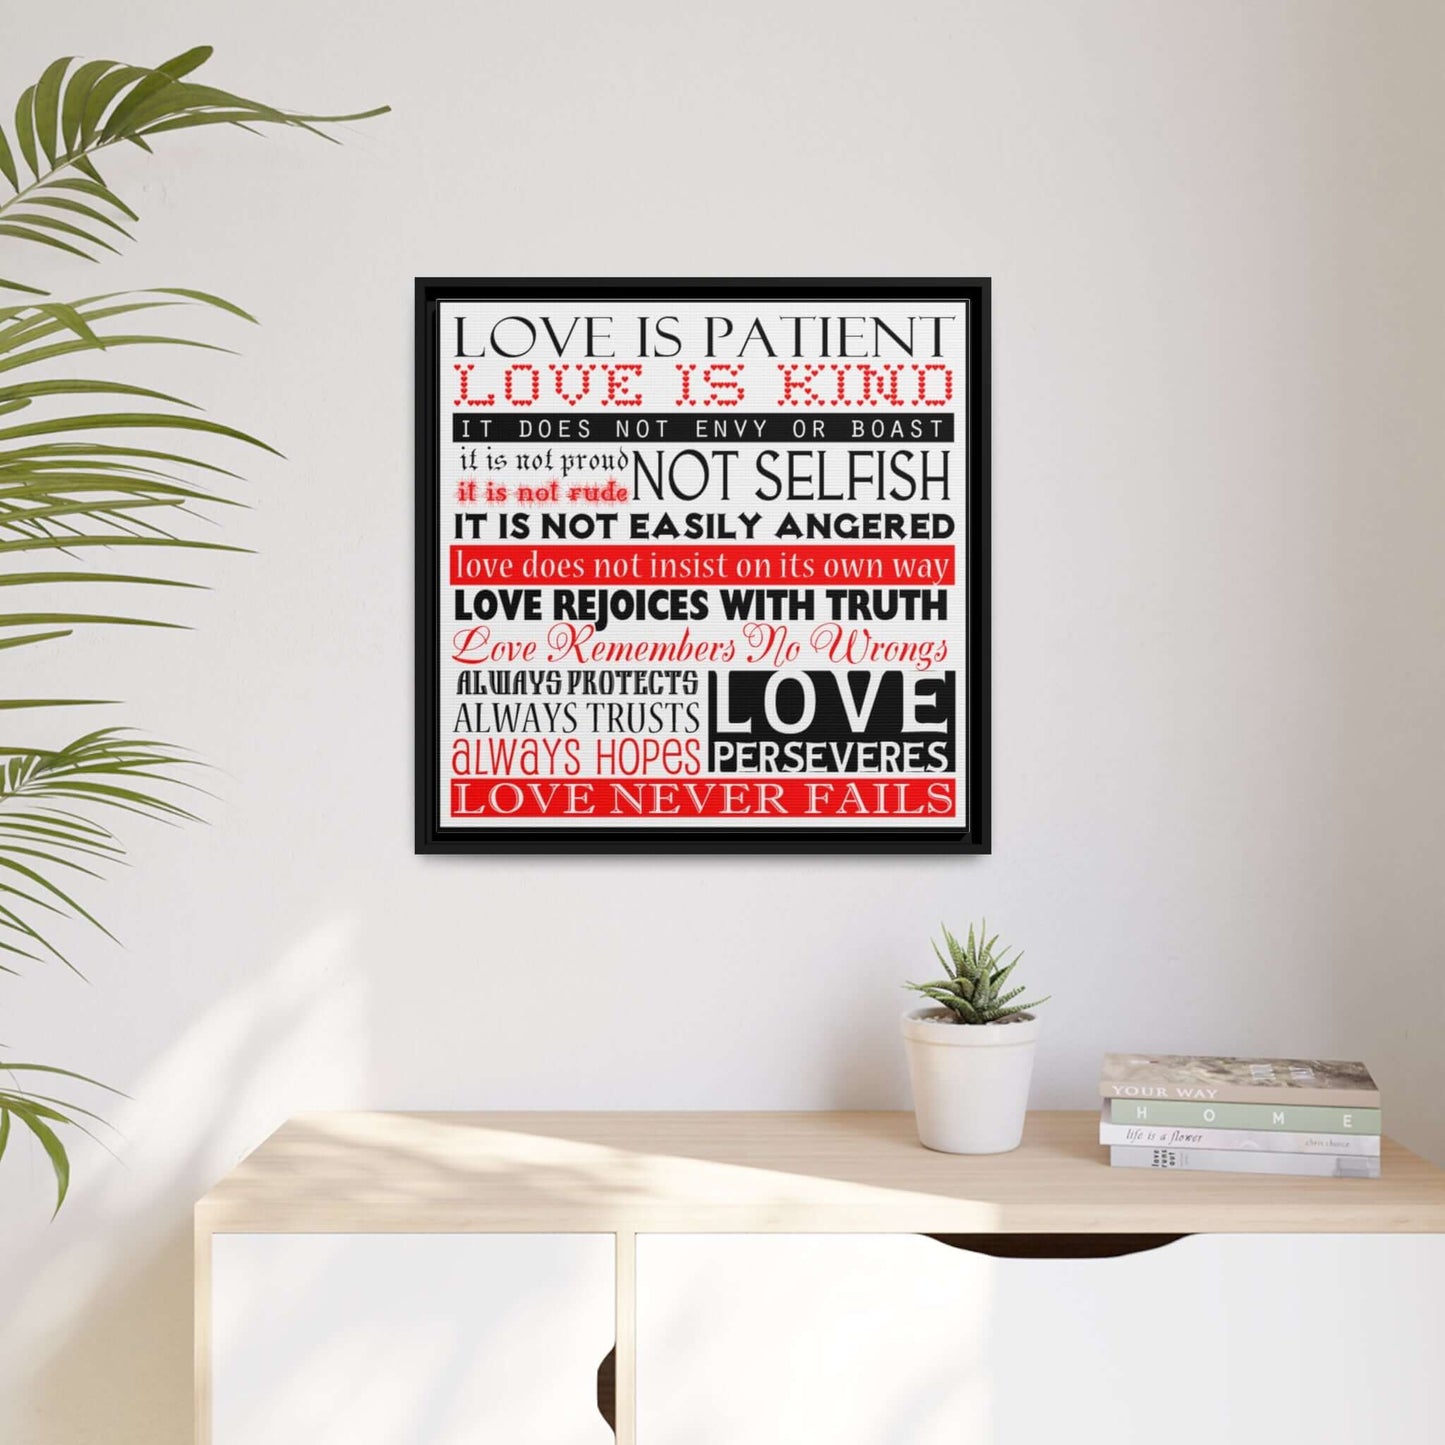 Elegant Black Framed Canvas with Inspirational Verse - Love is Patient, Love is Kind | Art & Wall Decor,Canvas,Decor,Eco-friendly,Framed,Hanging Hardware,Home & Living,Summer Picks,Sustainable